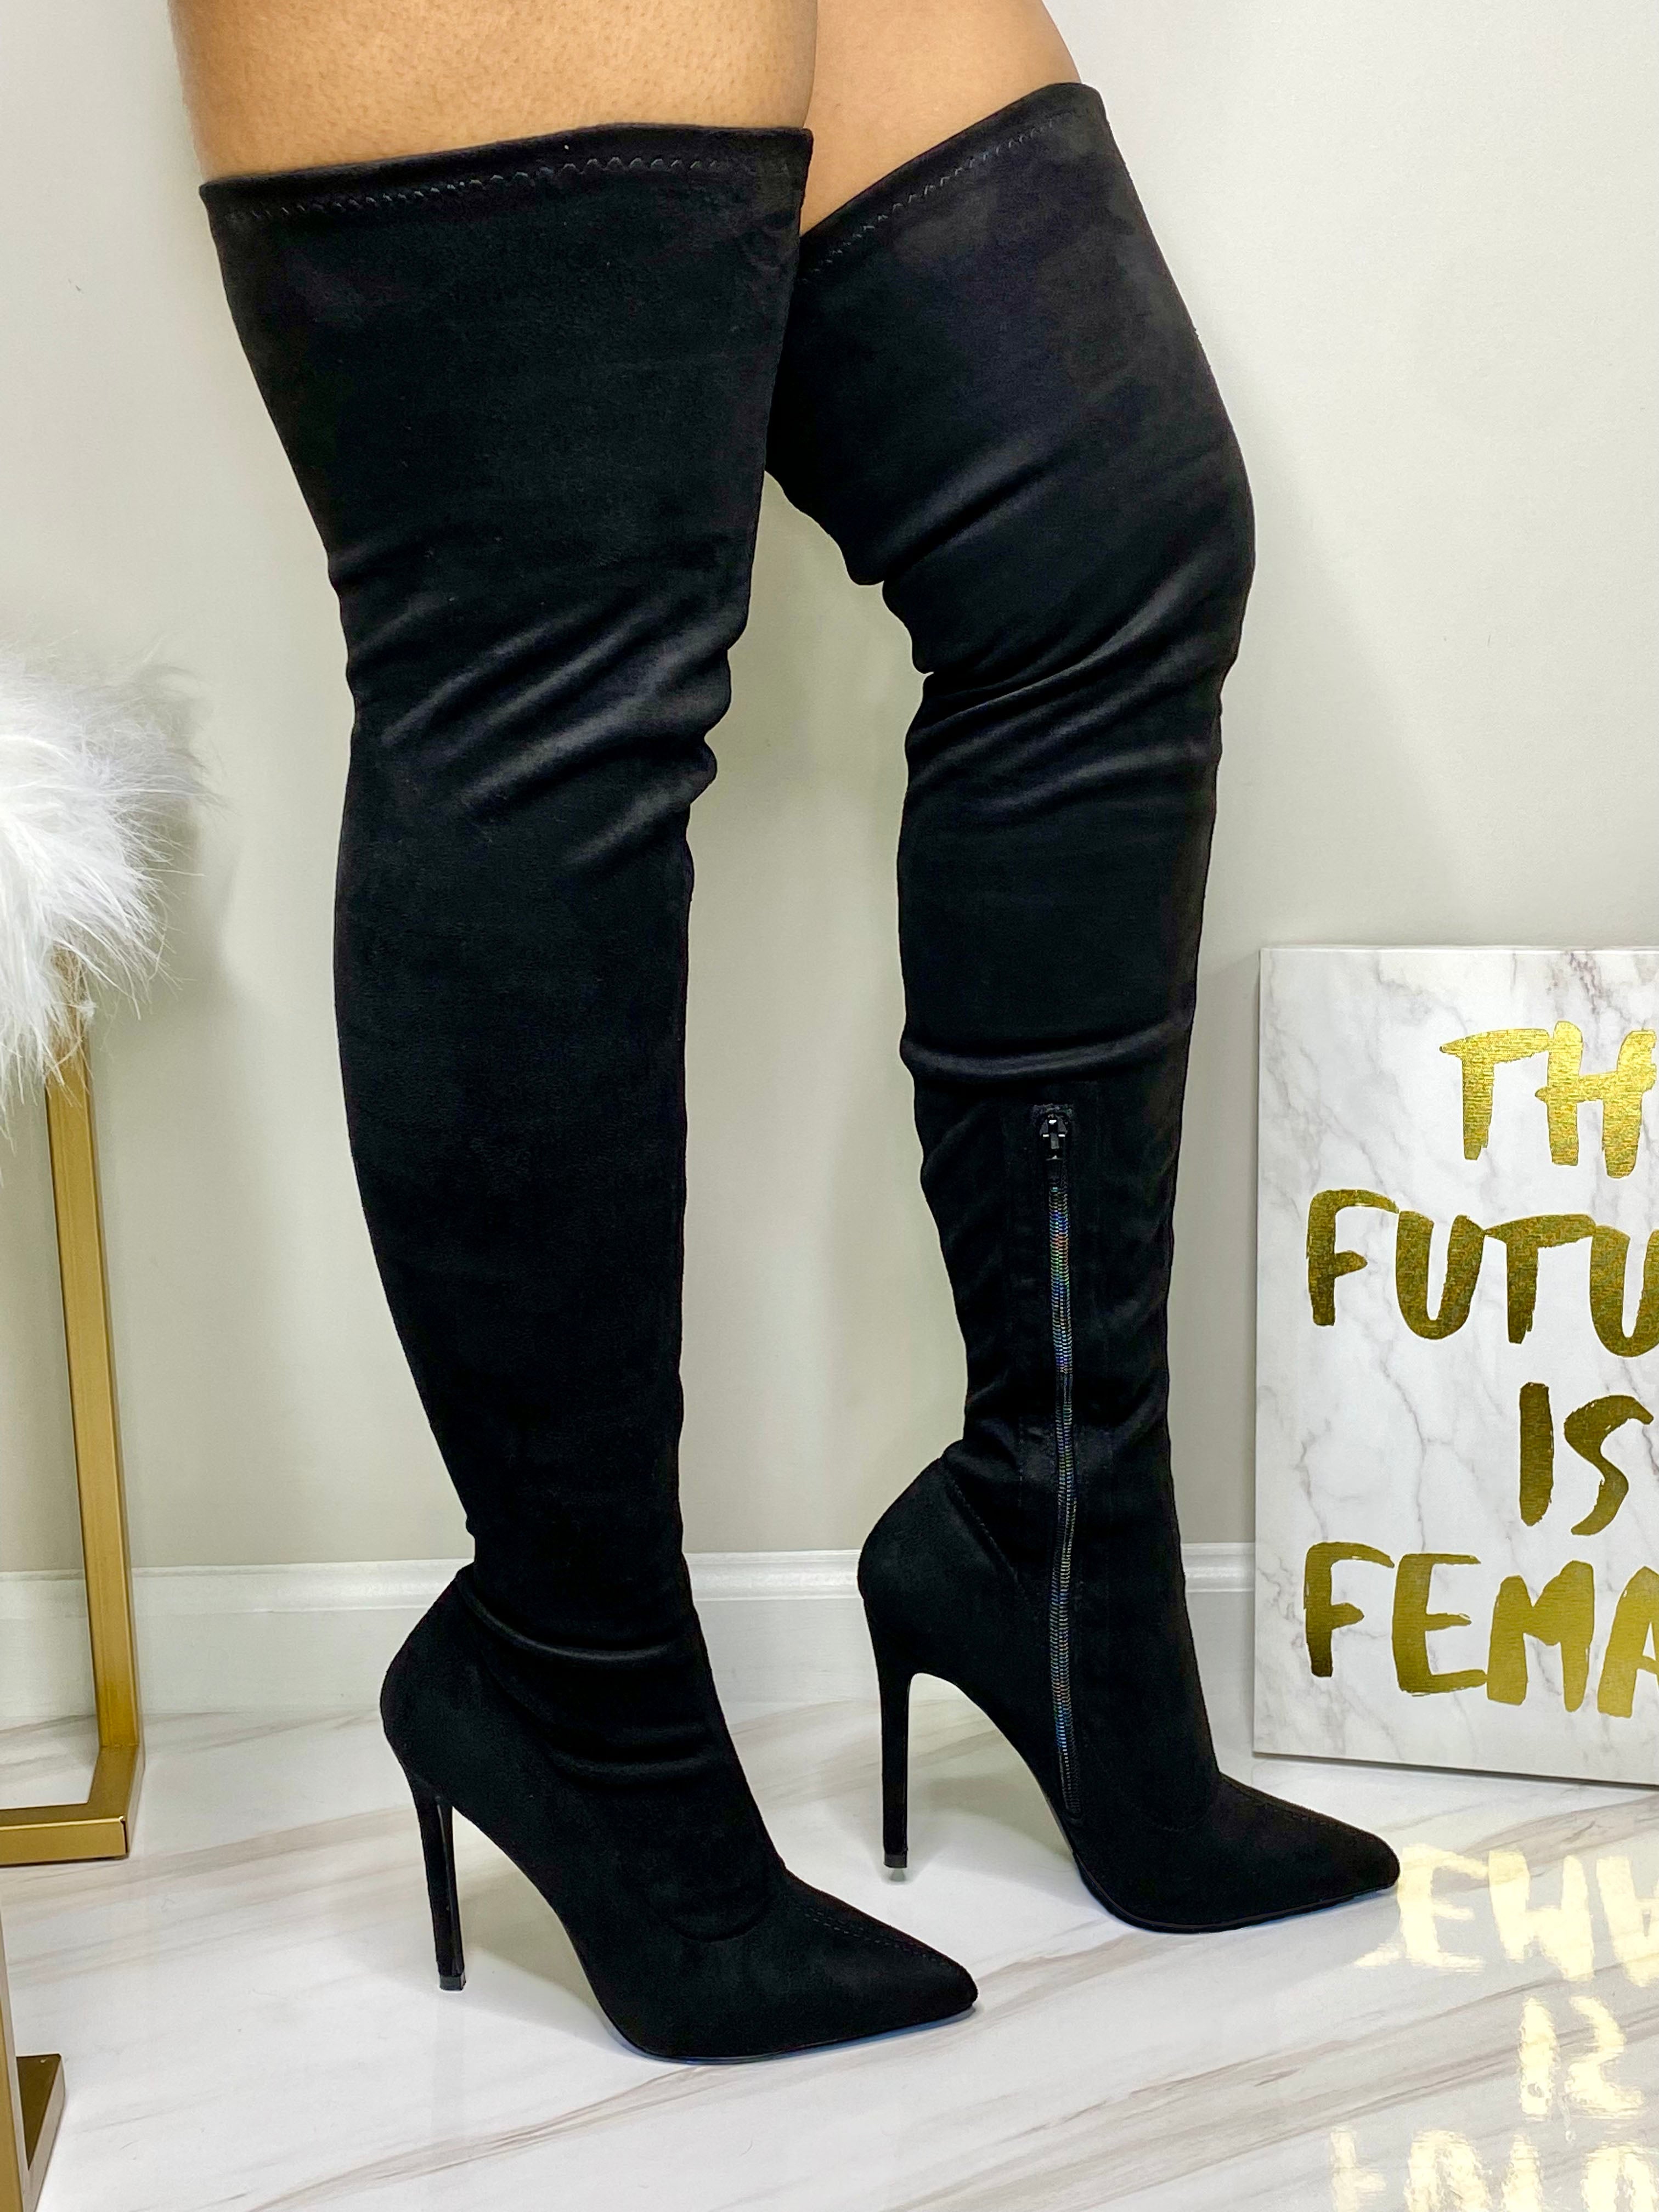 Women's Fashion-forward Shoes - Thigh High Boots, Heel Sandals & more ...